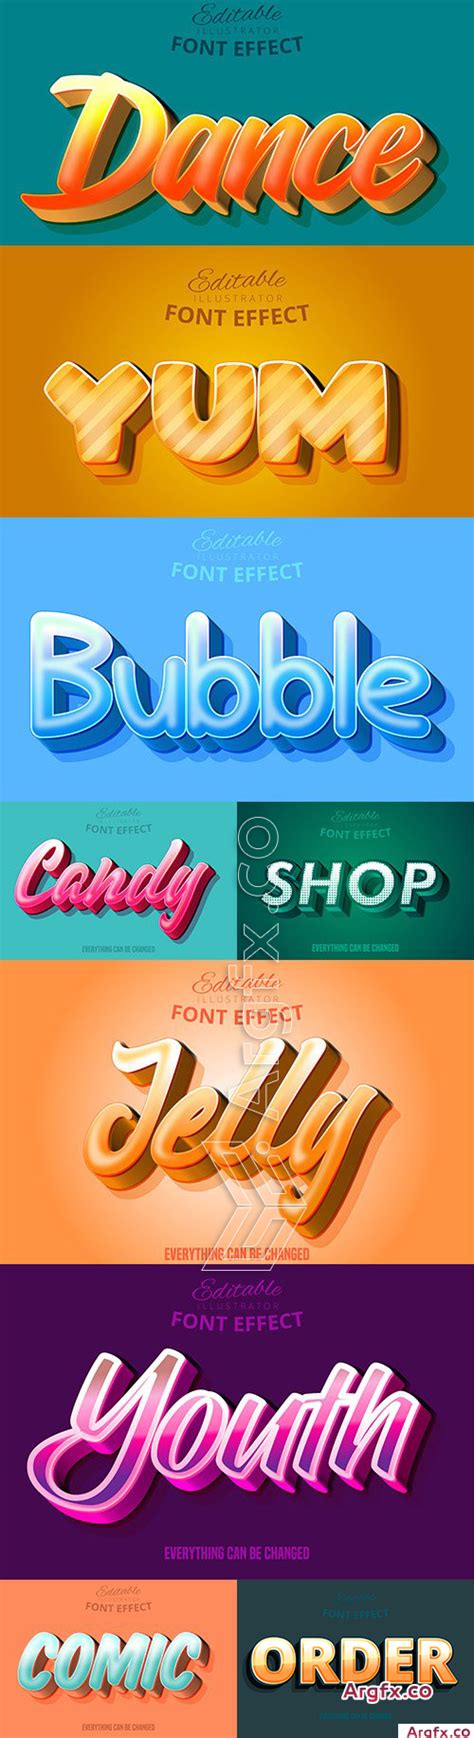 Editable Font Effect Text Collection Illustration 25 Free Download